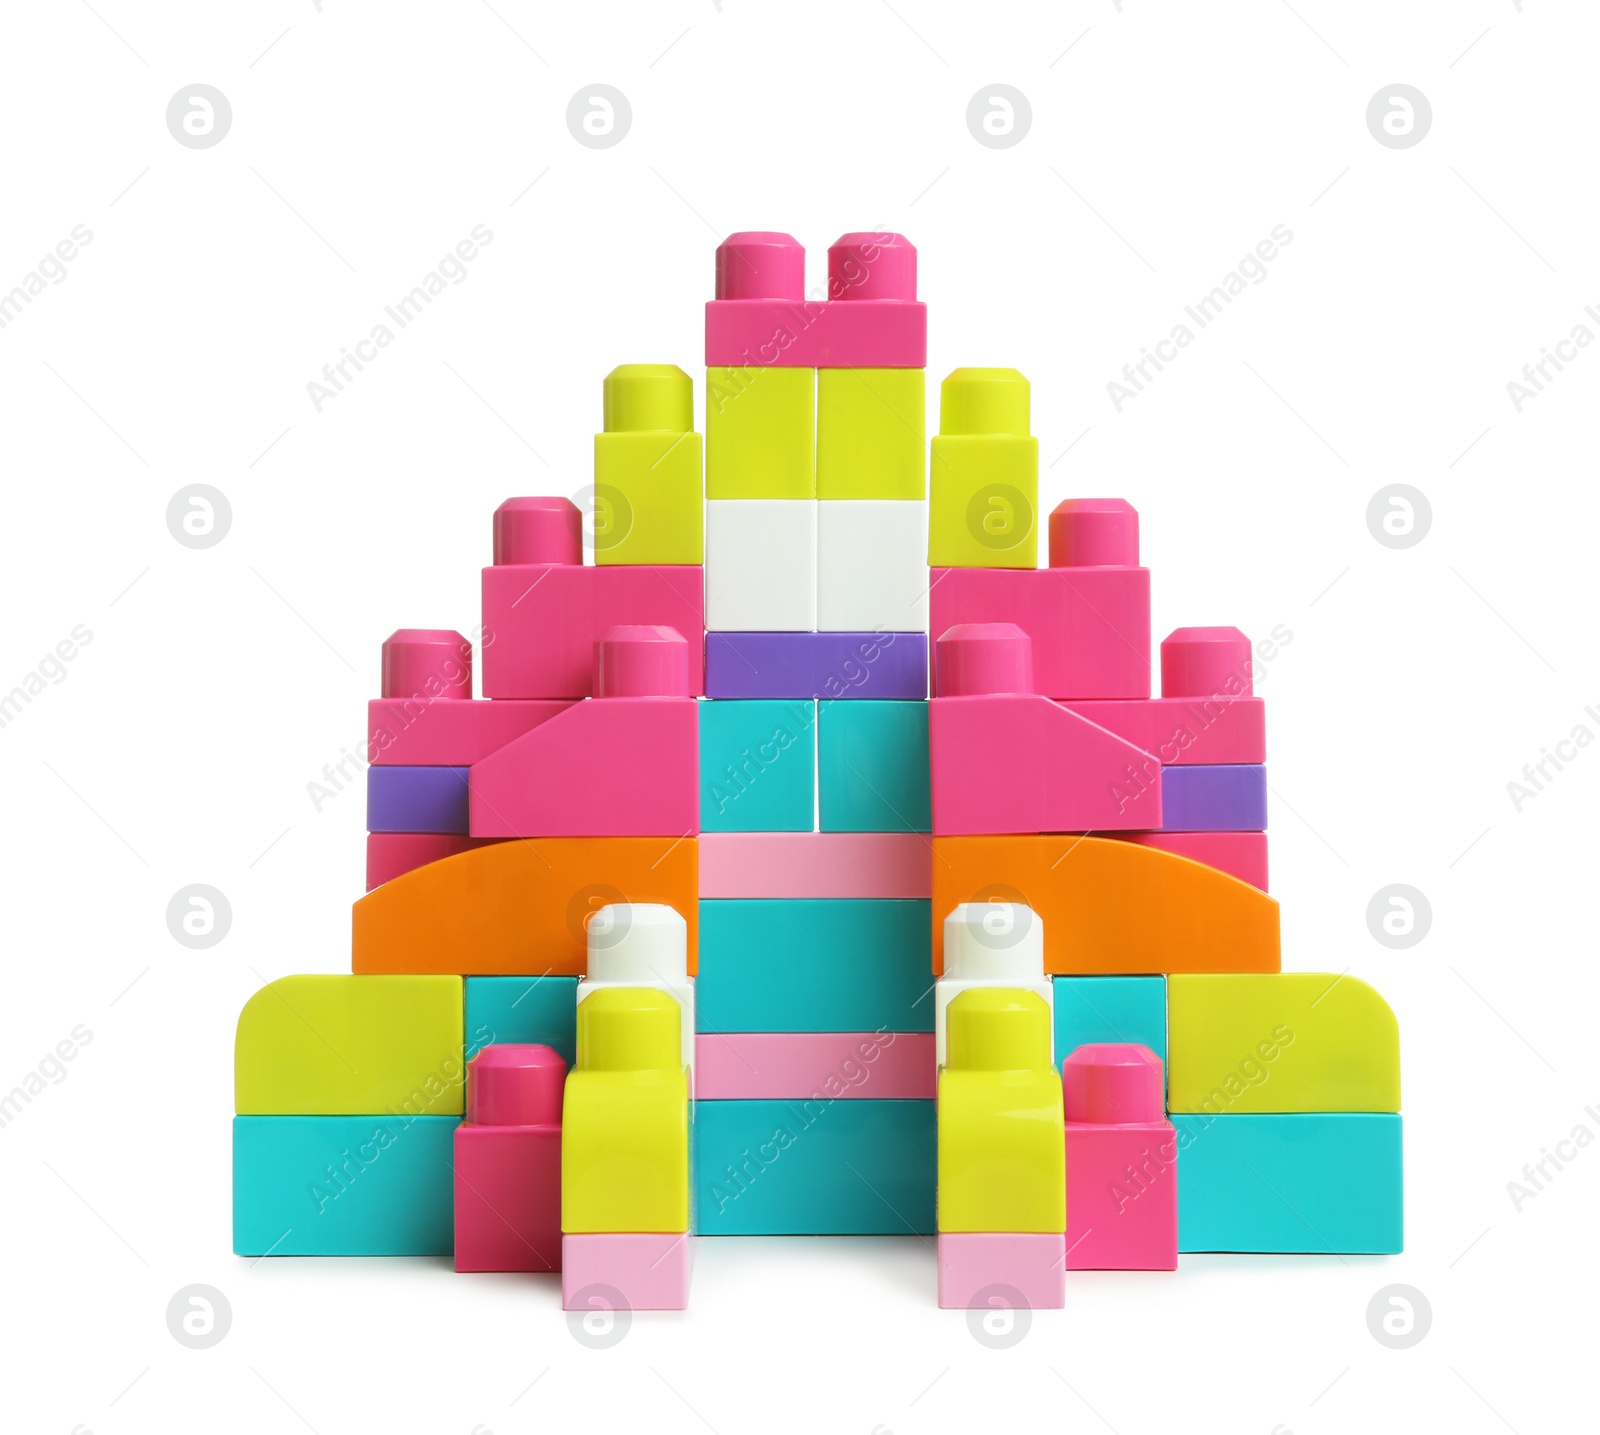 Photo of Castle made of colorful plastic blocks on white background